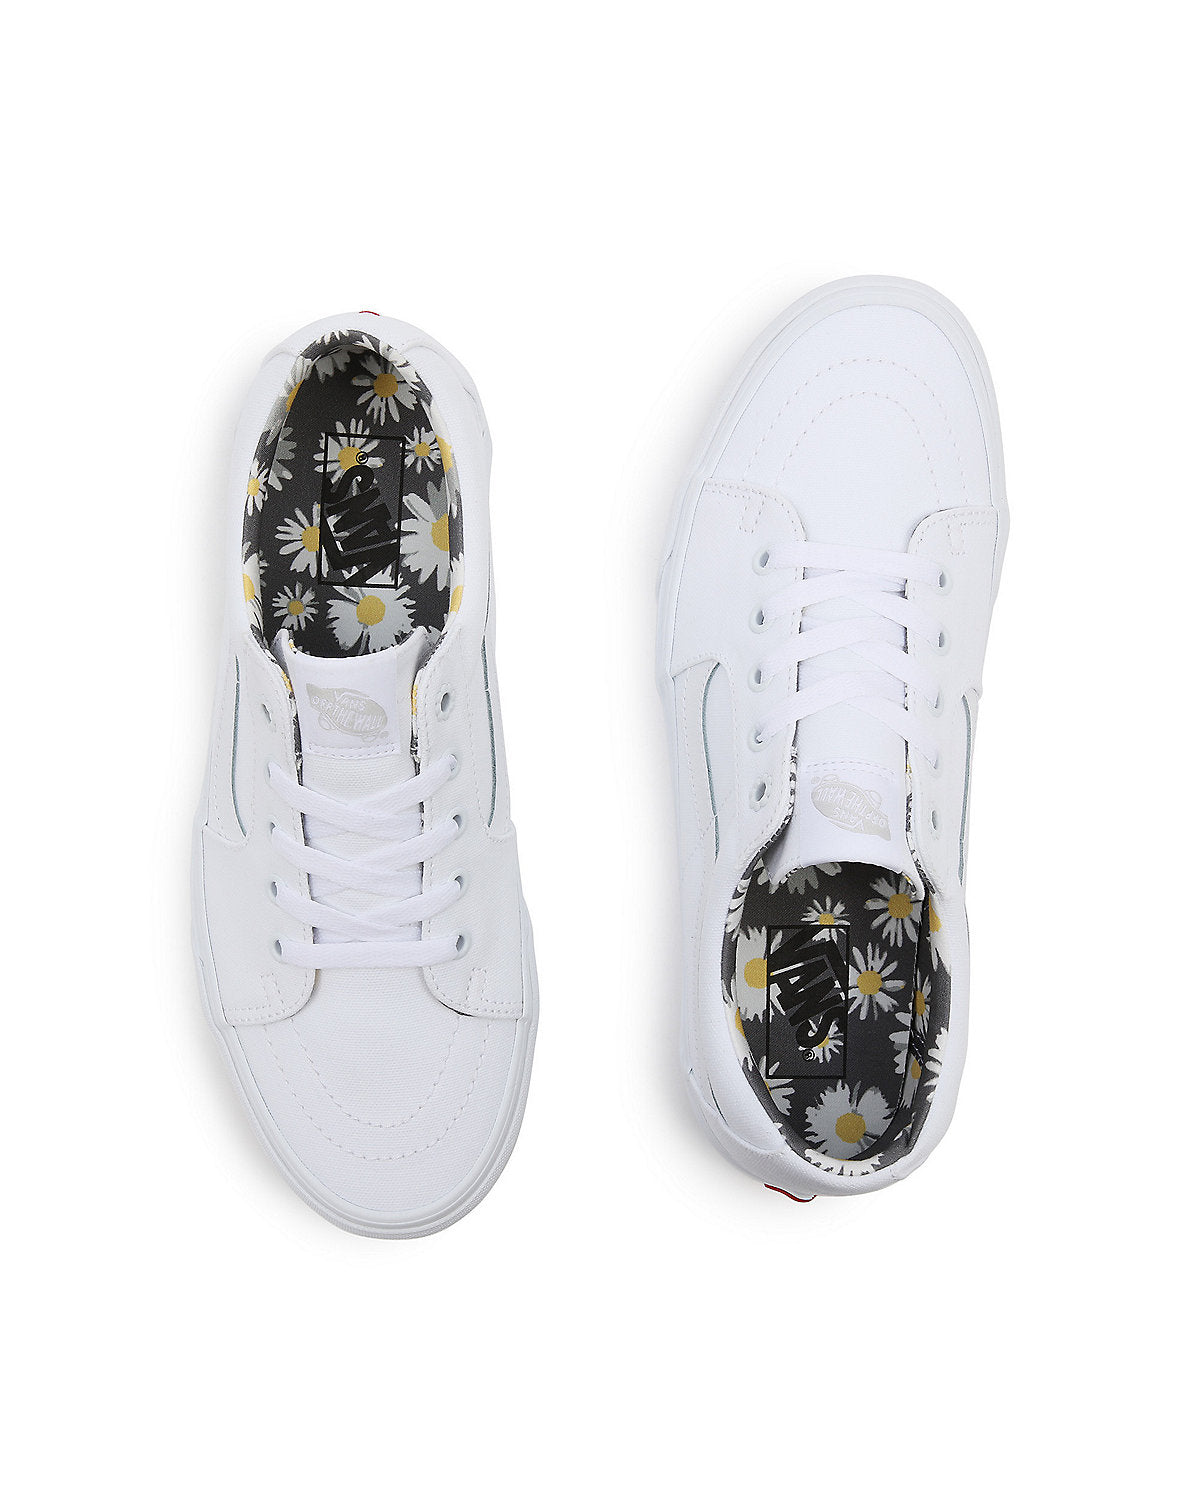 VANS Unisex Sk8-Low Smell The Flowers Trainers - White